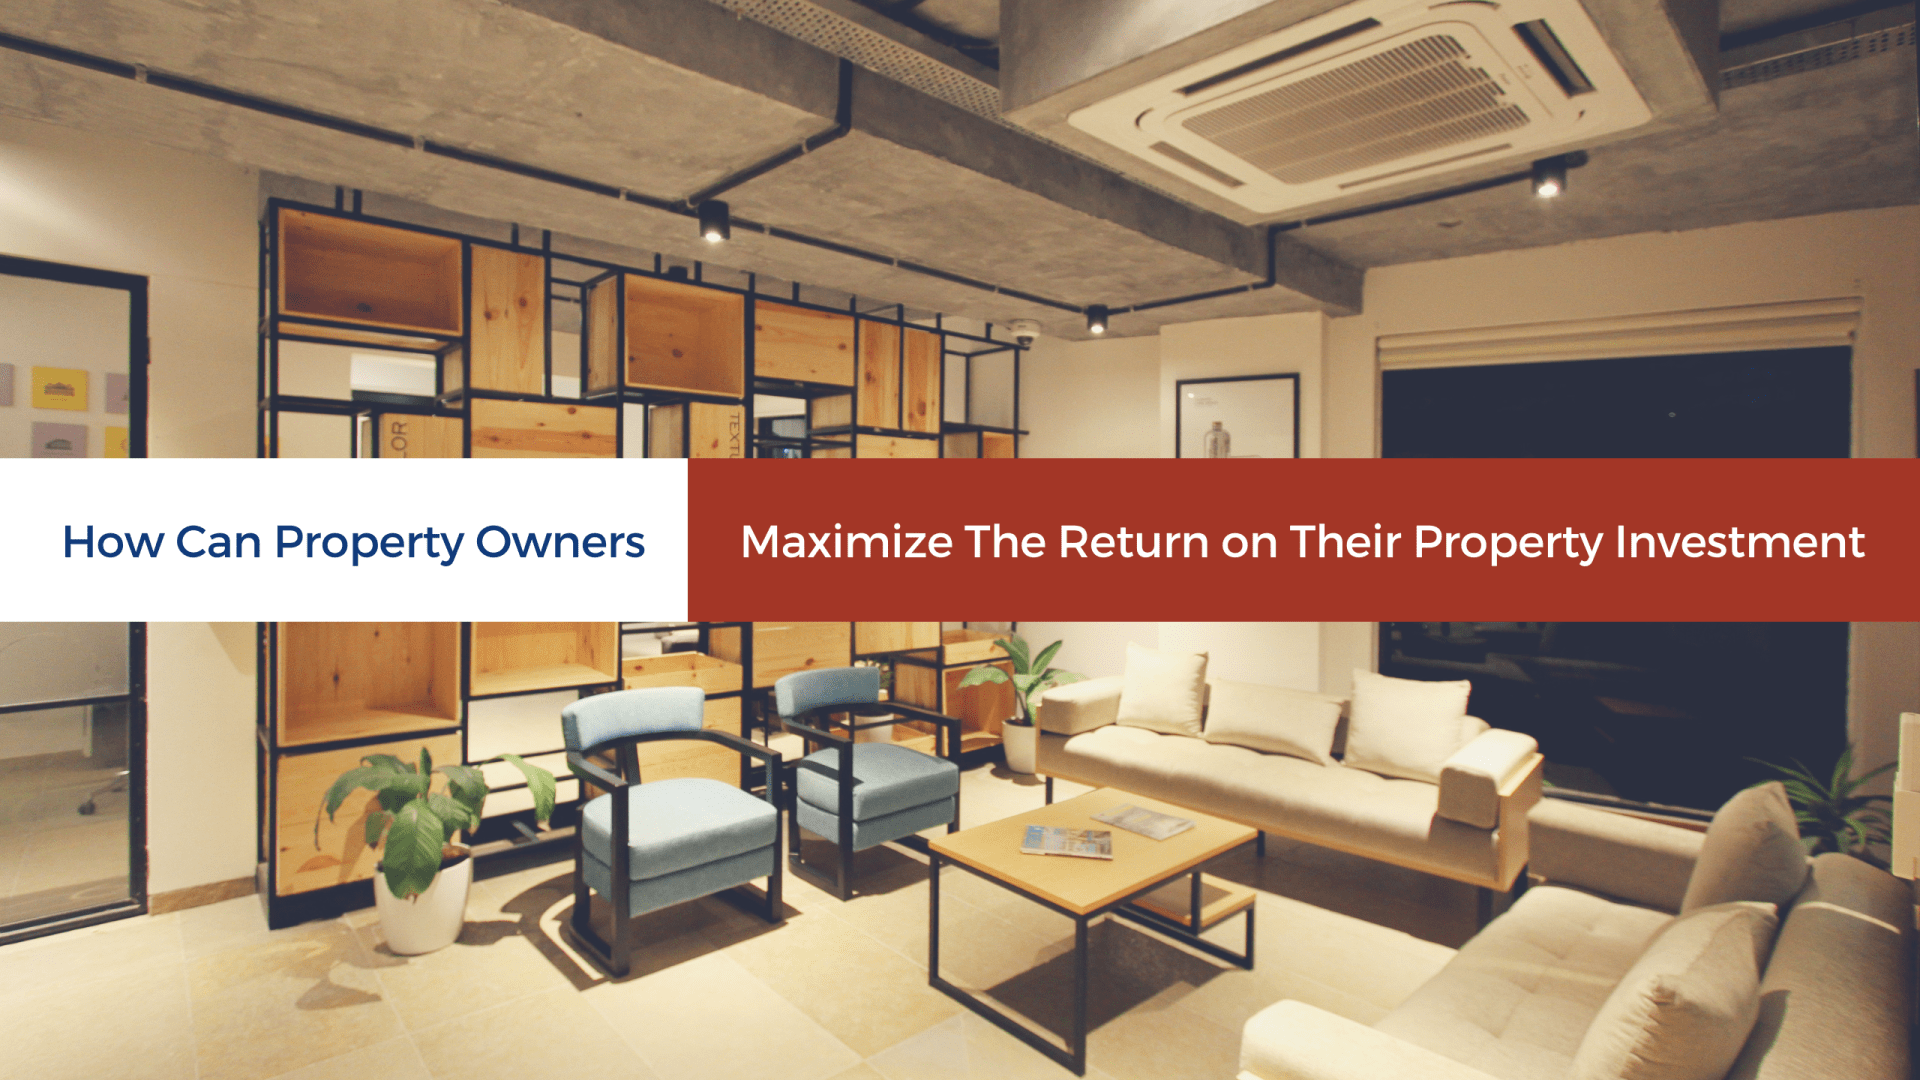 How Can Cleveland Property Owners Maximize The Return on Their Property Investment?